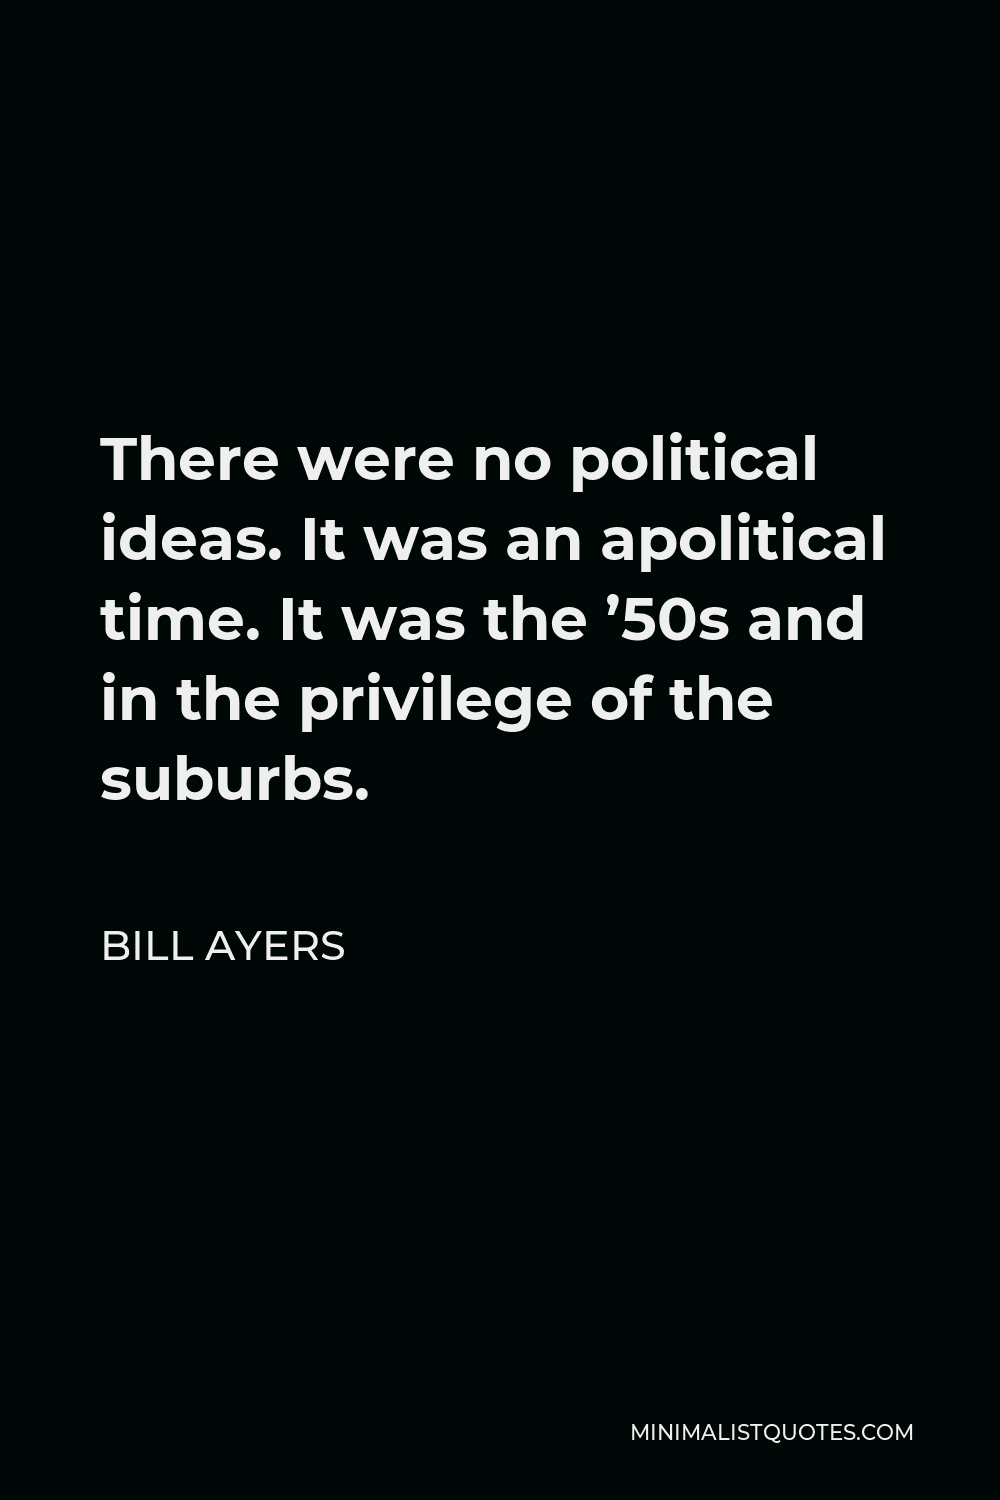 Bill Ayers Quote - There were no political ideas. It was an apolitical time. It was the ’50s and in the privilege of the suburbs.